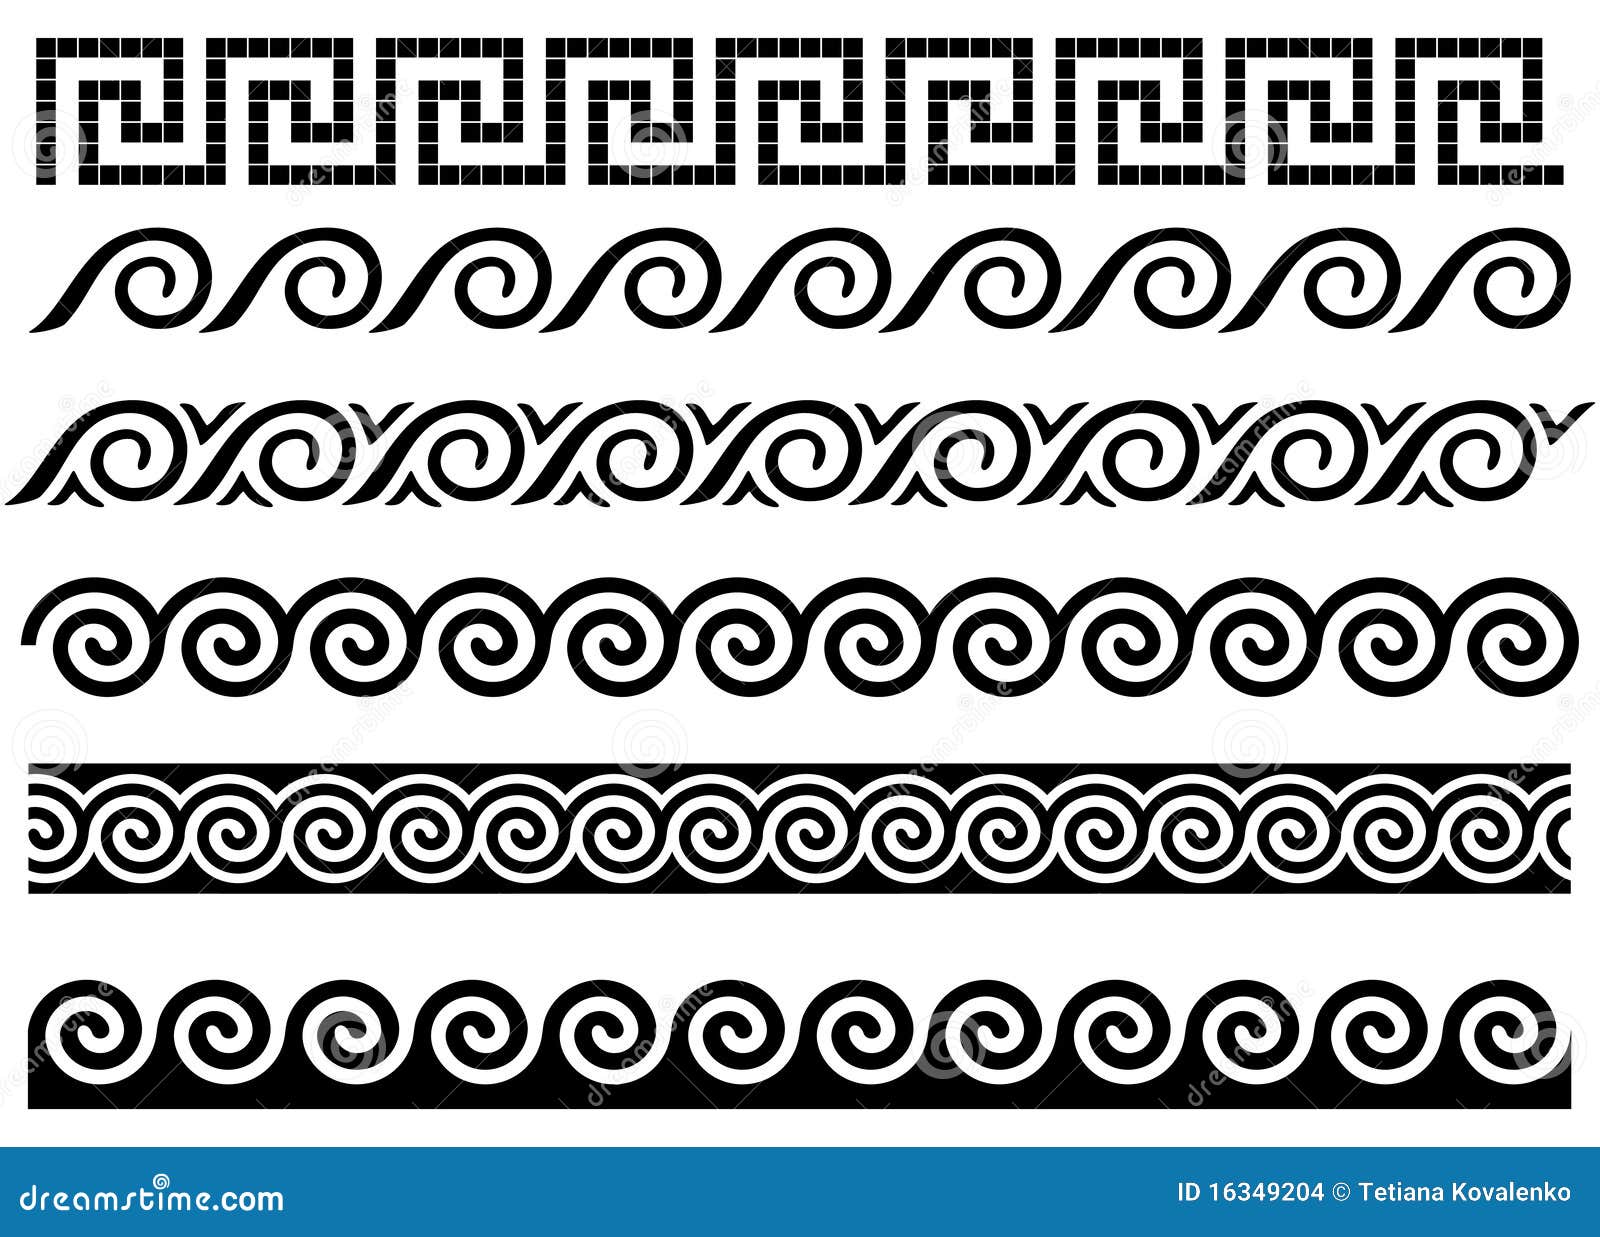 meander and wave. ancient greek ornament.